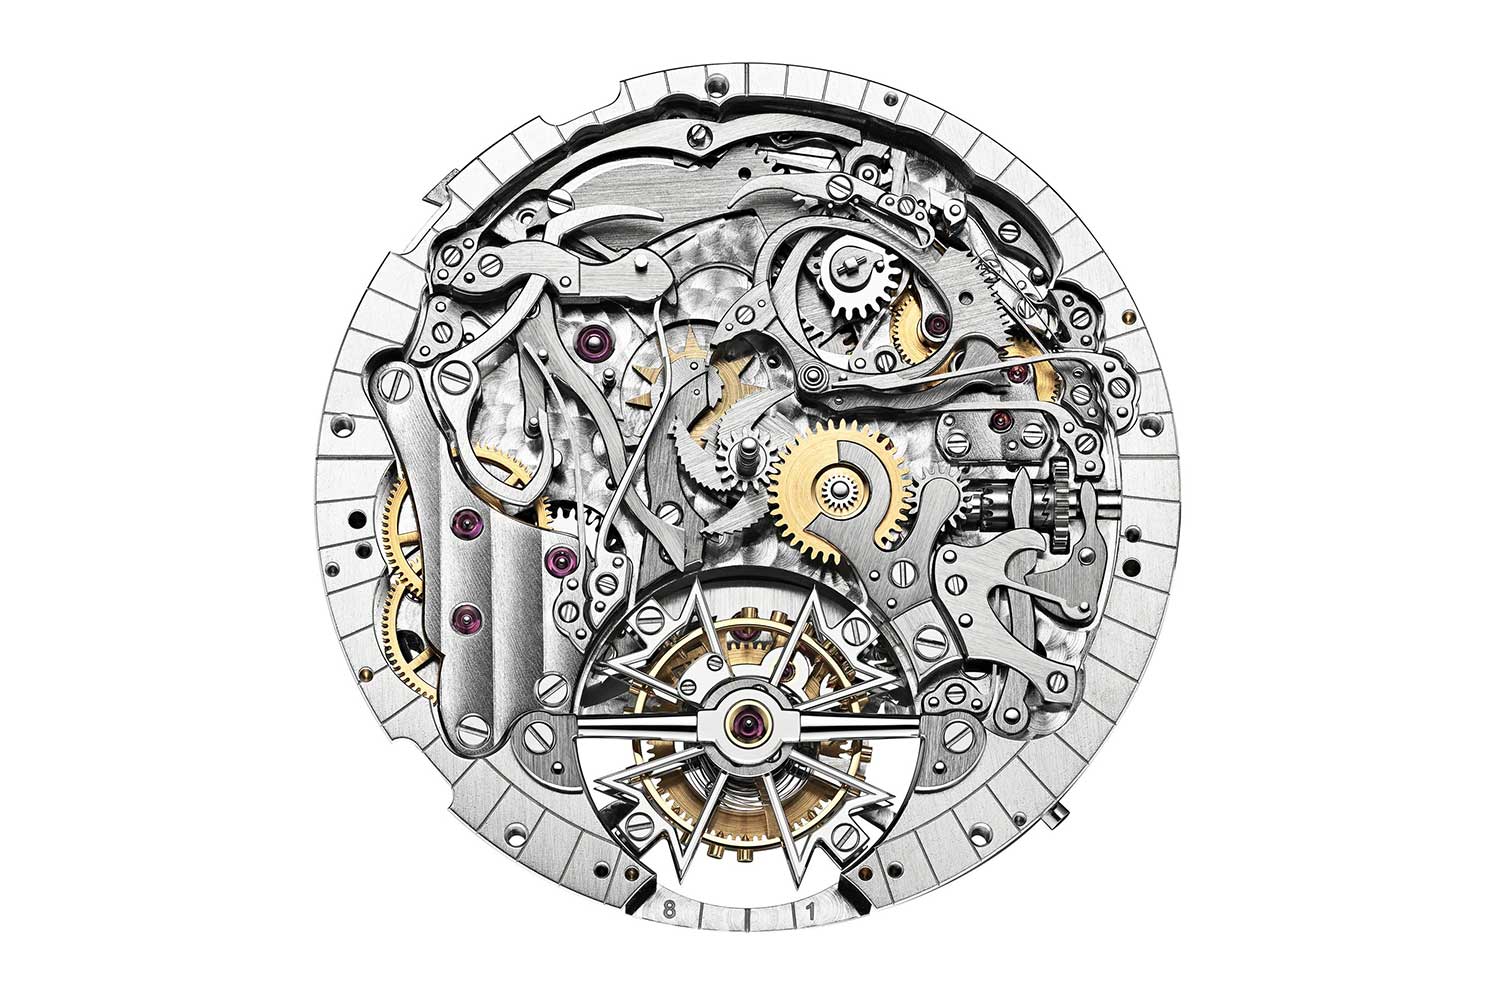 The Caliber 2755 TMR from underneath the dial